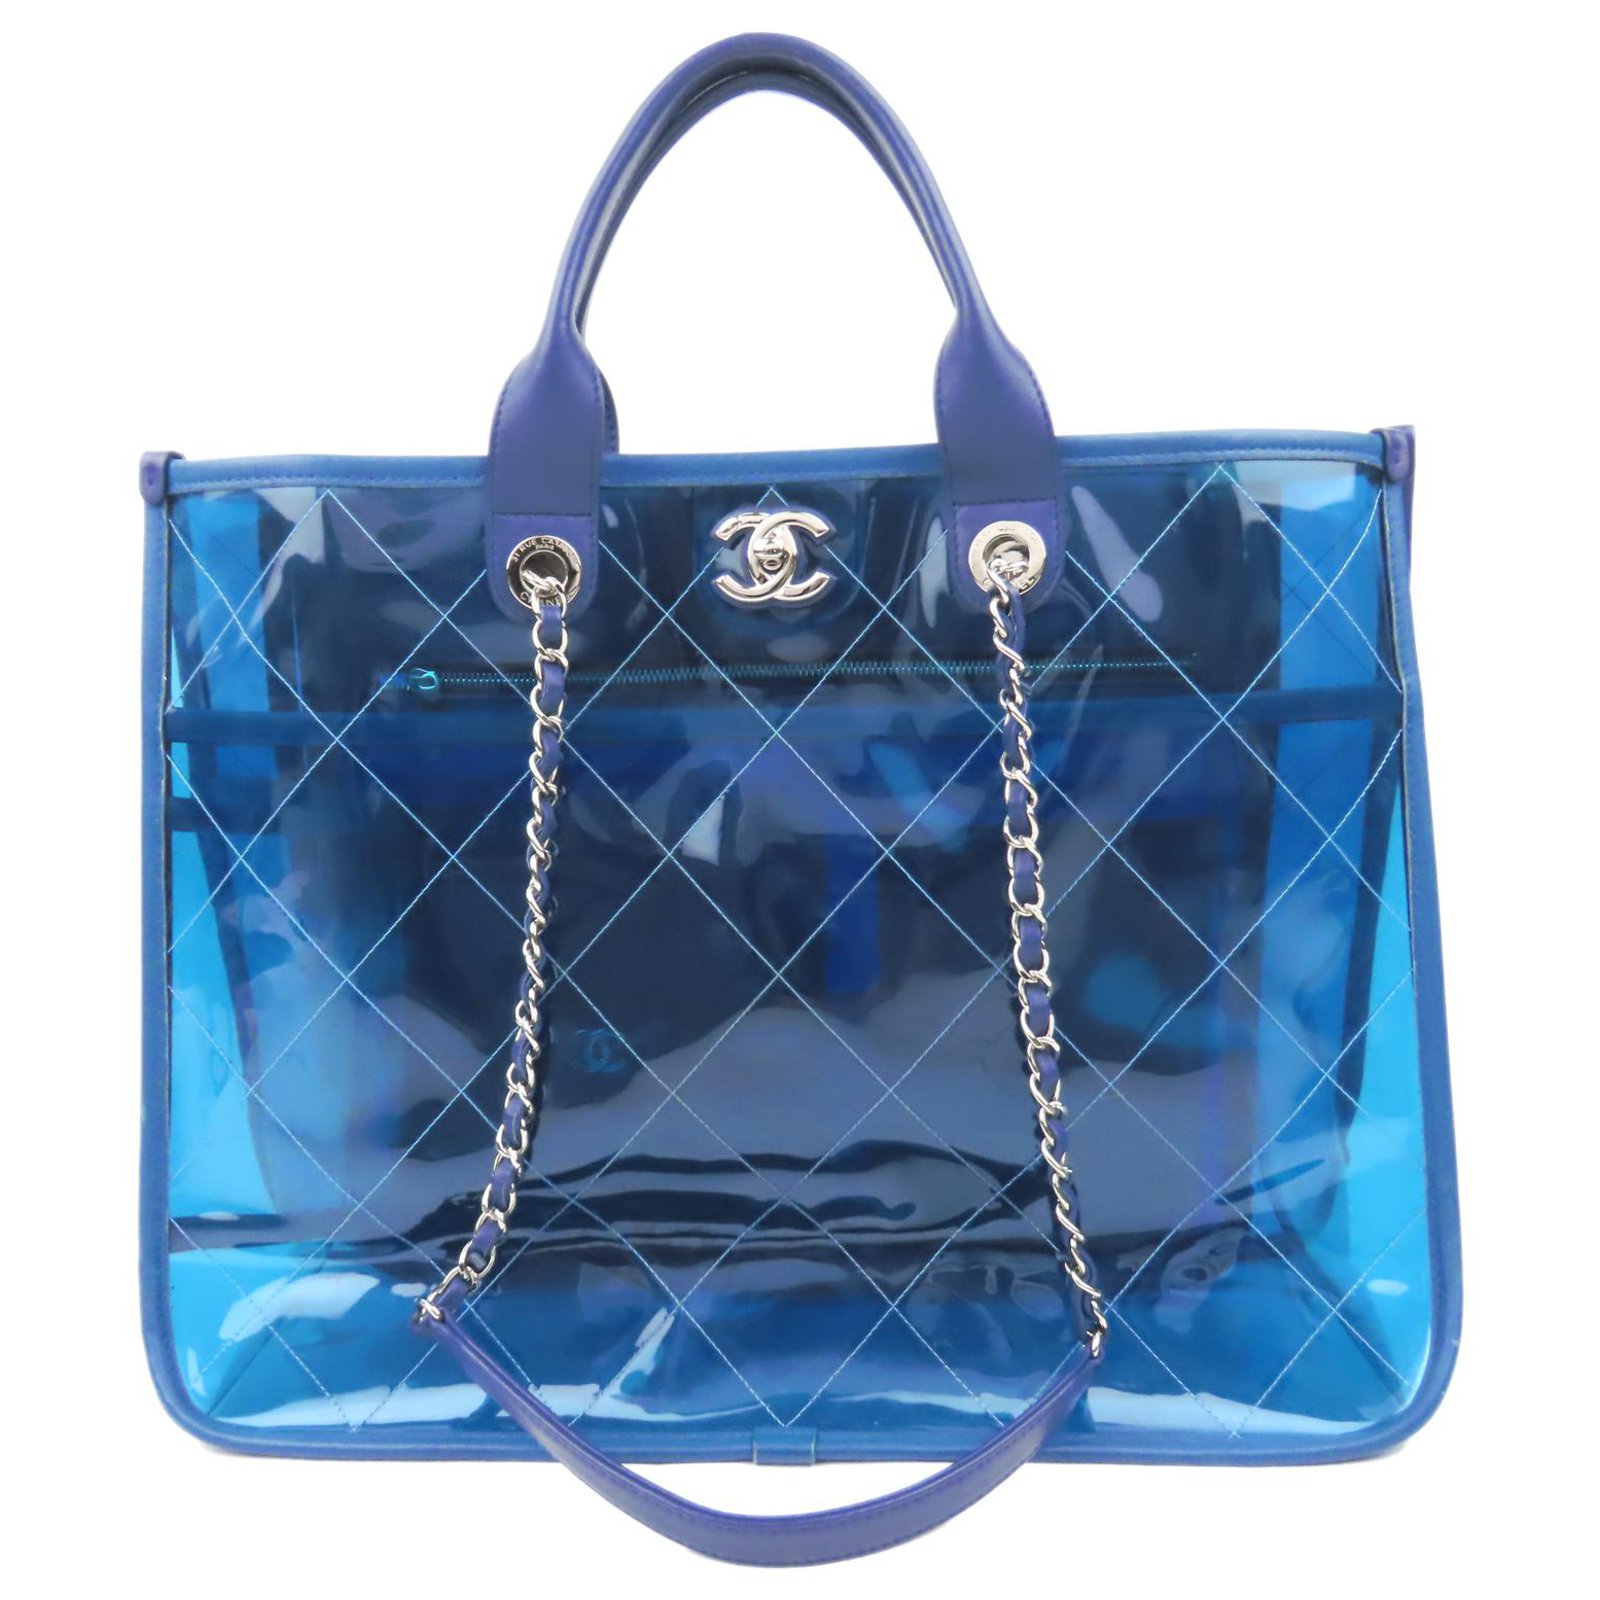 Chanel blue 2018 Quilted PVC Medium Coco Splash Shopping Tote